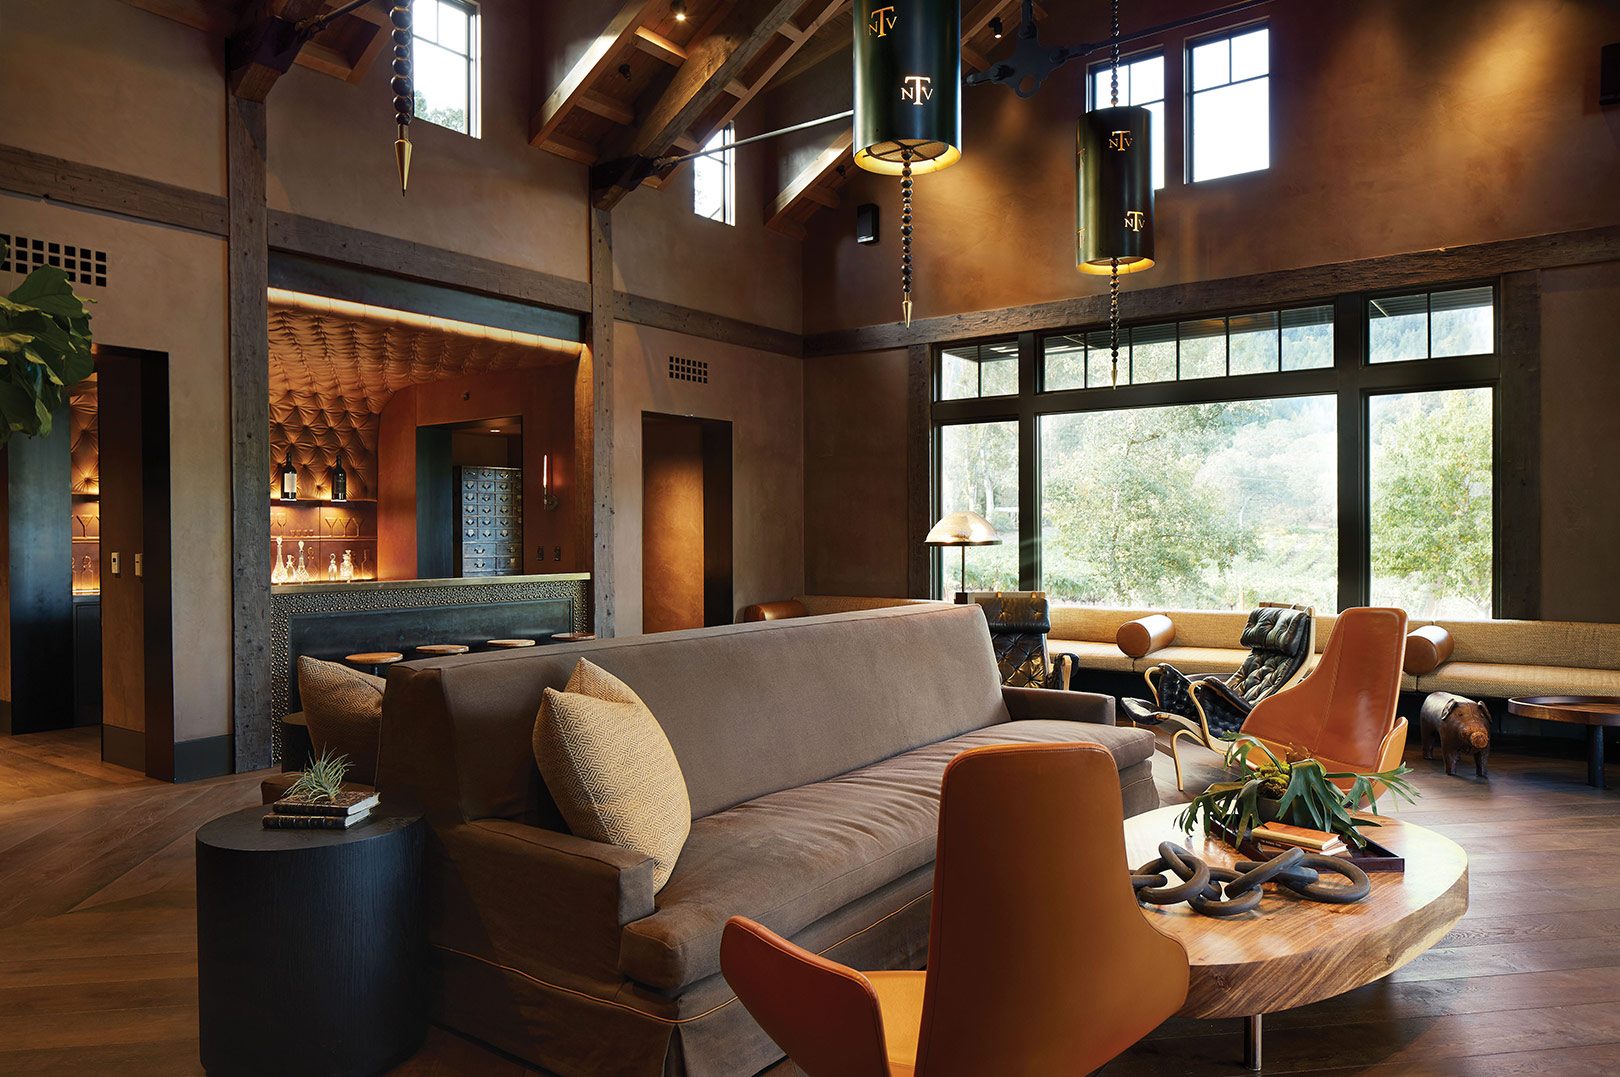 Trinchero Family Estate Tasting Room renovation and remodel completed by FDC in Sonoma County